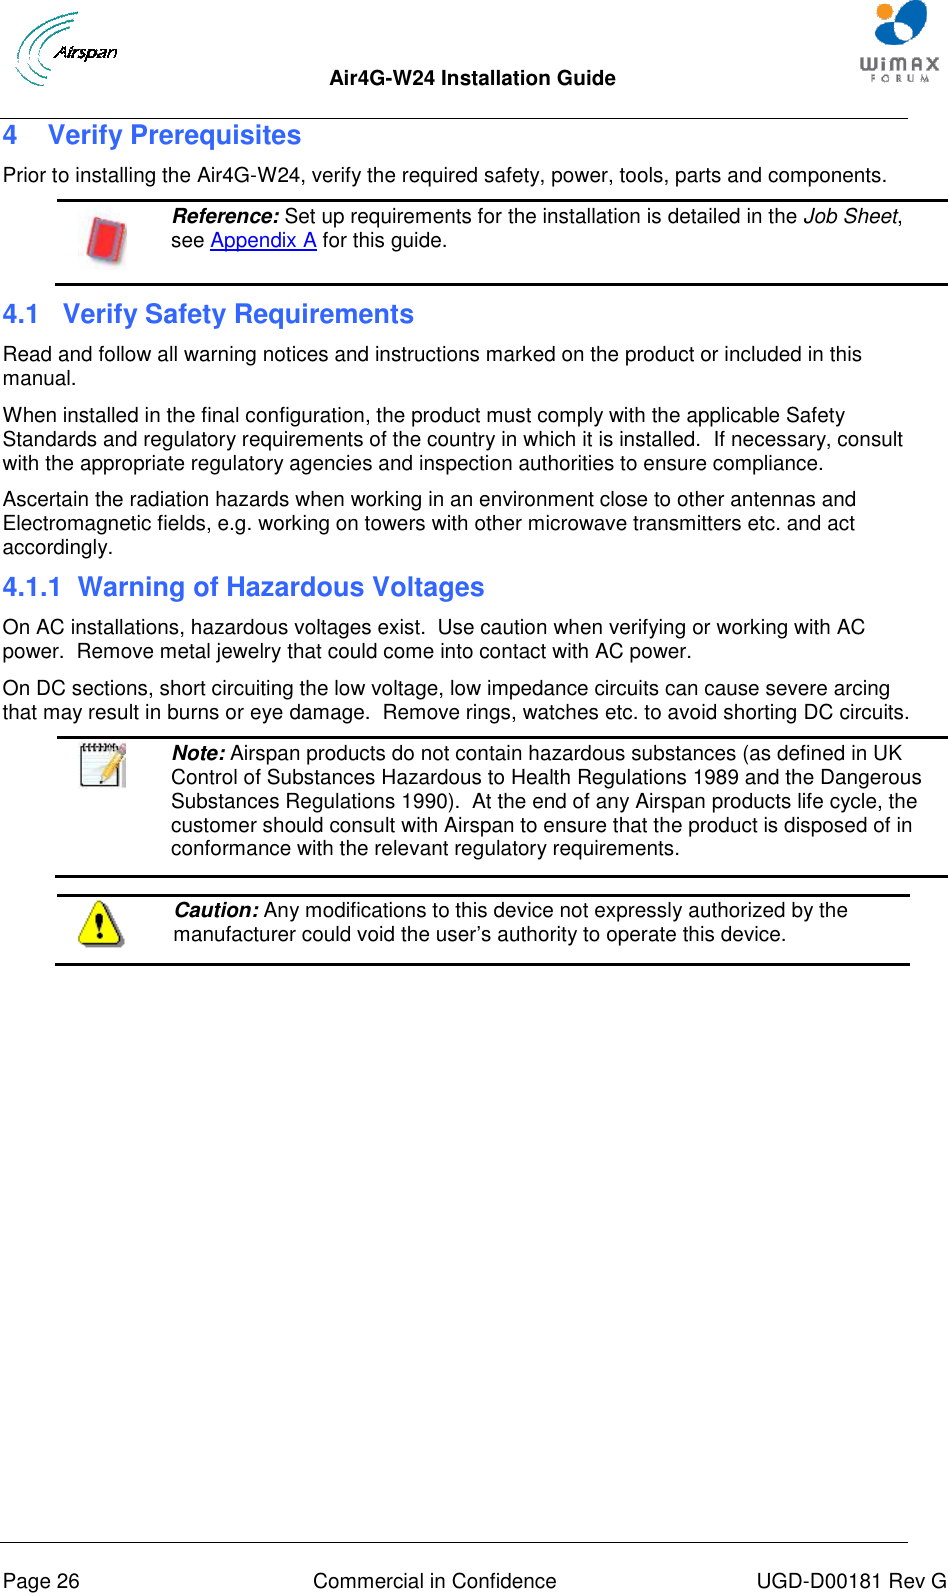  Air4G-W24 Installation Guide     Page 26  Commercial in Confidence  UGD-D00181 Rev G 4  Verify Prerequisites Prior to installing the Air4G-W24, verify the required safety, power, tools, parts and components.  Reference: Set up requirements for the installation is detailed in the Job Sheet, see Appendix A for this guide. 4.1  Verify Safety Requirements Read and follow all warning notices and instructions marked on the product or included in this manual. When installed in the final configuration, the product must comply with the applicable Safety Standards and regulatory requirements of the country in which it is installed.  If necessary, consult with the appropriate regulatory agencies and inspection authorities to ensure compliance. Ascertain the radiation hazards when working in an environment close to other antennas and Electromagnetic fields, e.g. working on towers with other microwave transmitters etc. and act accordingly. 4.1.1  Warning of Hazardous Voltages On AC installations, hazardous voltages exist.  Use caution when verifying or working with AC power.  Remove metal jewelry that could come into contact with AC power. On DC sections, short circuiting the low voltage, low impedance circuits can cause severe arcing that may result in burns or eye damage.  Remove rings, watches etc. to avoid shorting DC circuits.   Note: Airspan products do not contain hazardous substances (as defined in UK Control of Substances Hazardous to Health Regulations 1989 and the Dangerous Substances Regulations 1990).  At the end of any Airspan products life cycle, the customer should consult with Airspan to ensure that the product is disposed of in conformance with the relevant regulatory requirements.   Caution: Any modifications to this device not expressly authorized by the manufacturer could void the user‟s authority to operate this device.  